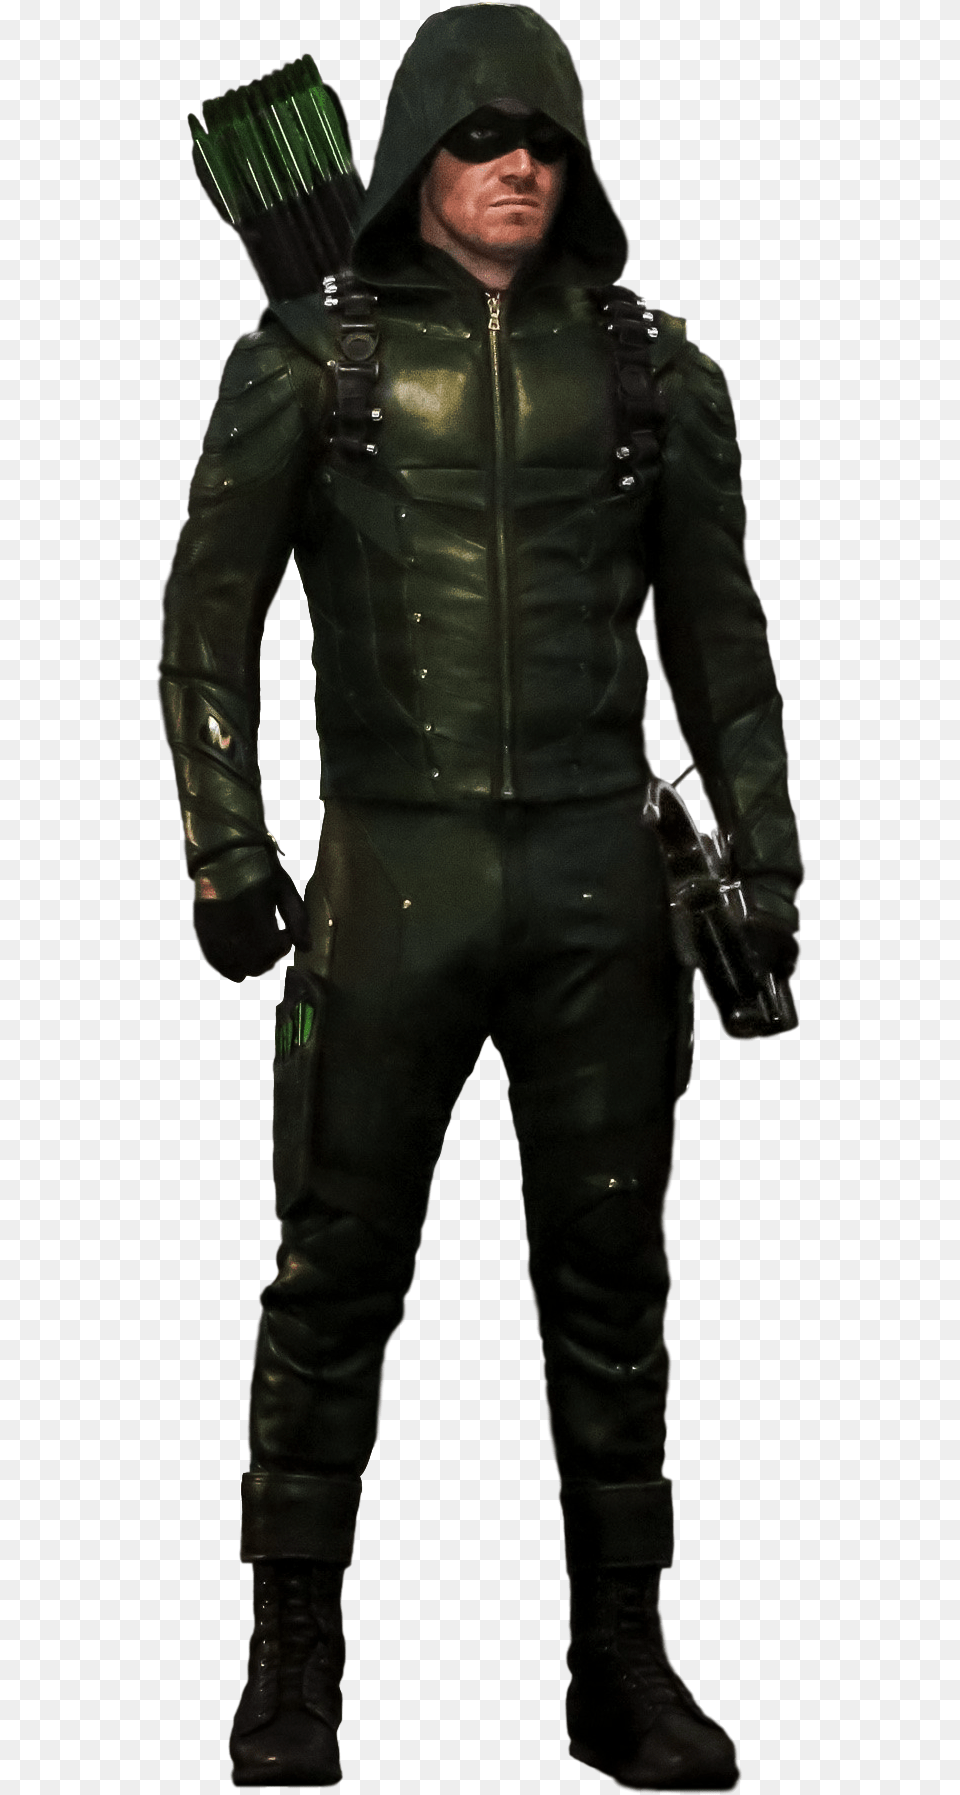 Transparent Background By Camo Green Arrow Dc, Clothing, Coat, Jacket, Adult Png